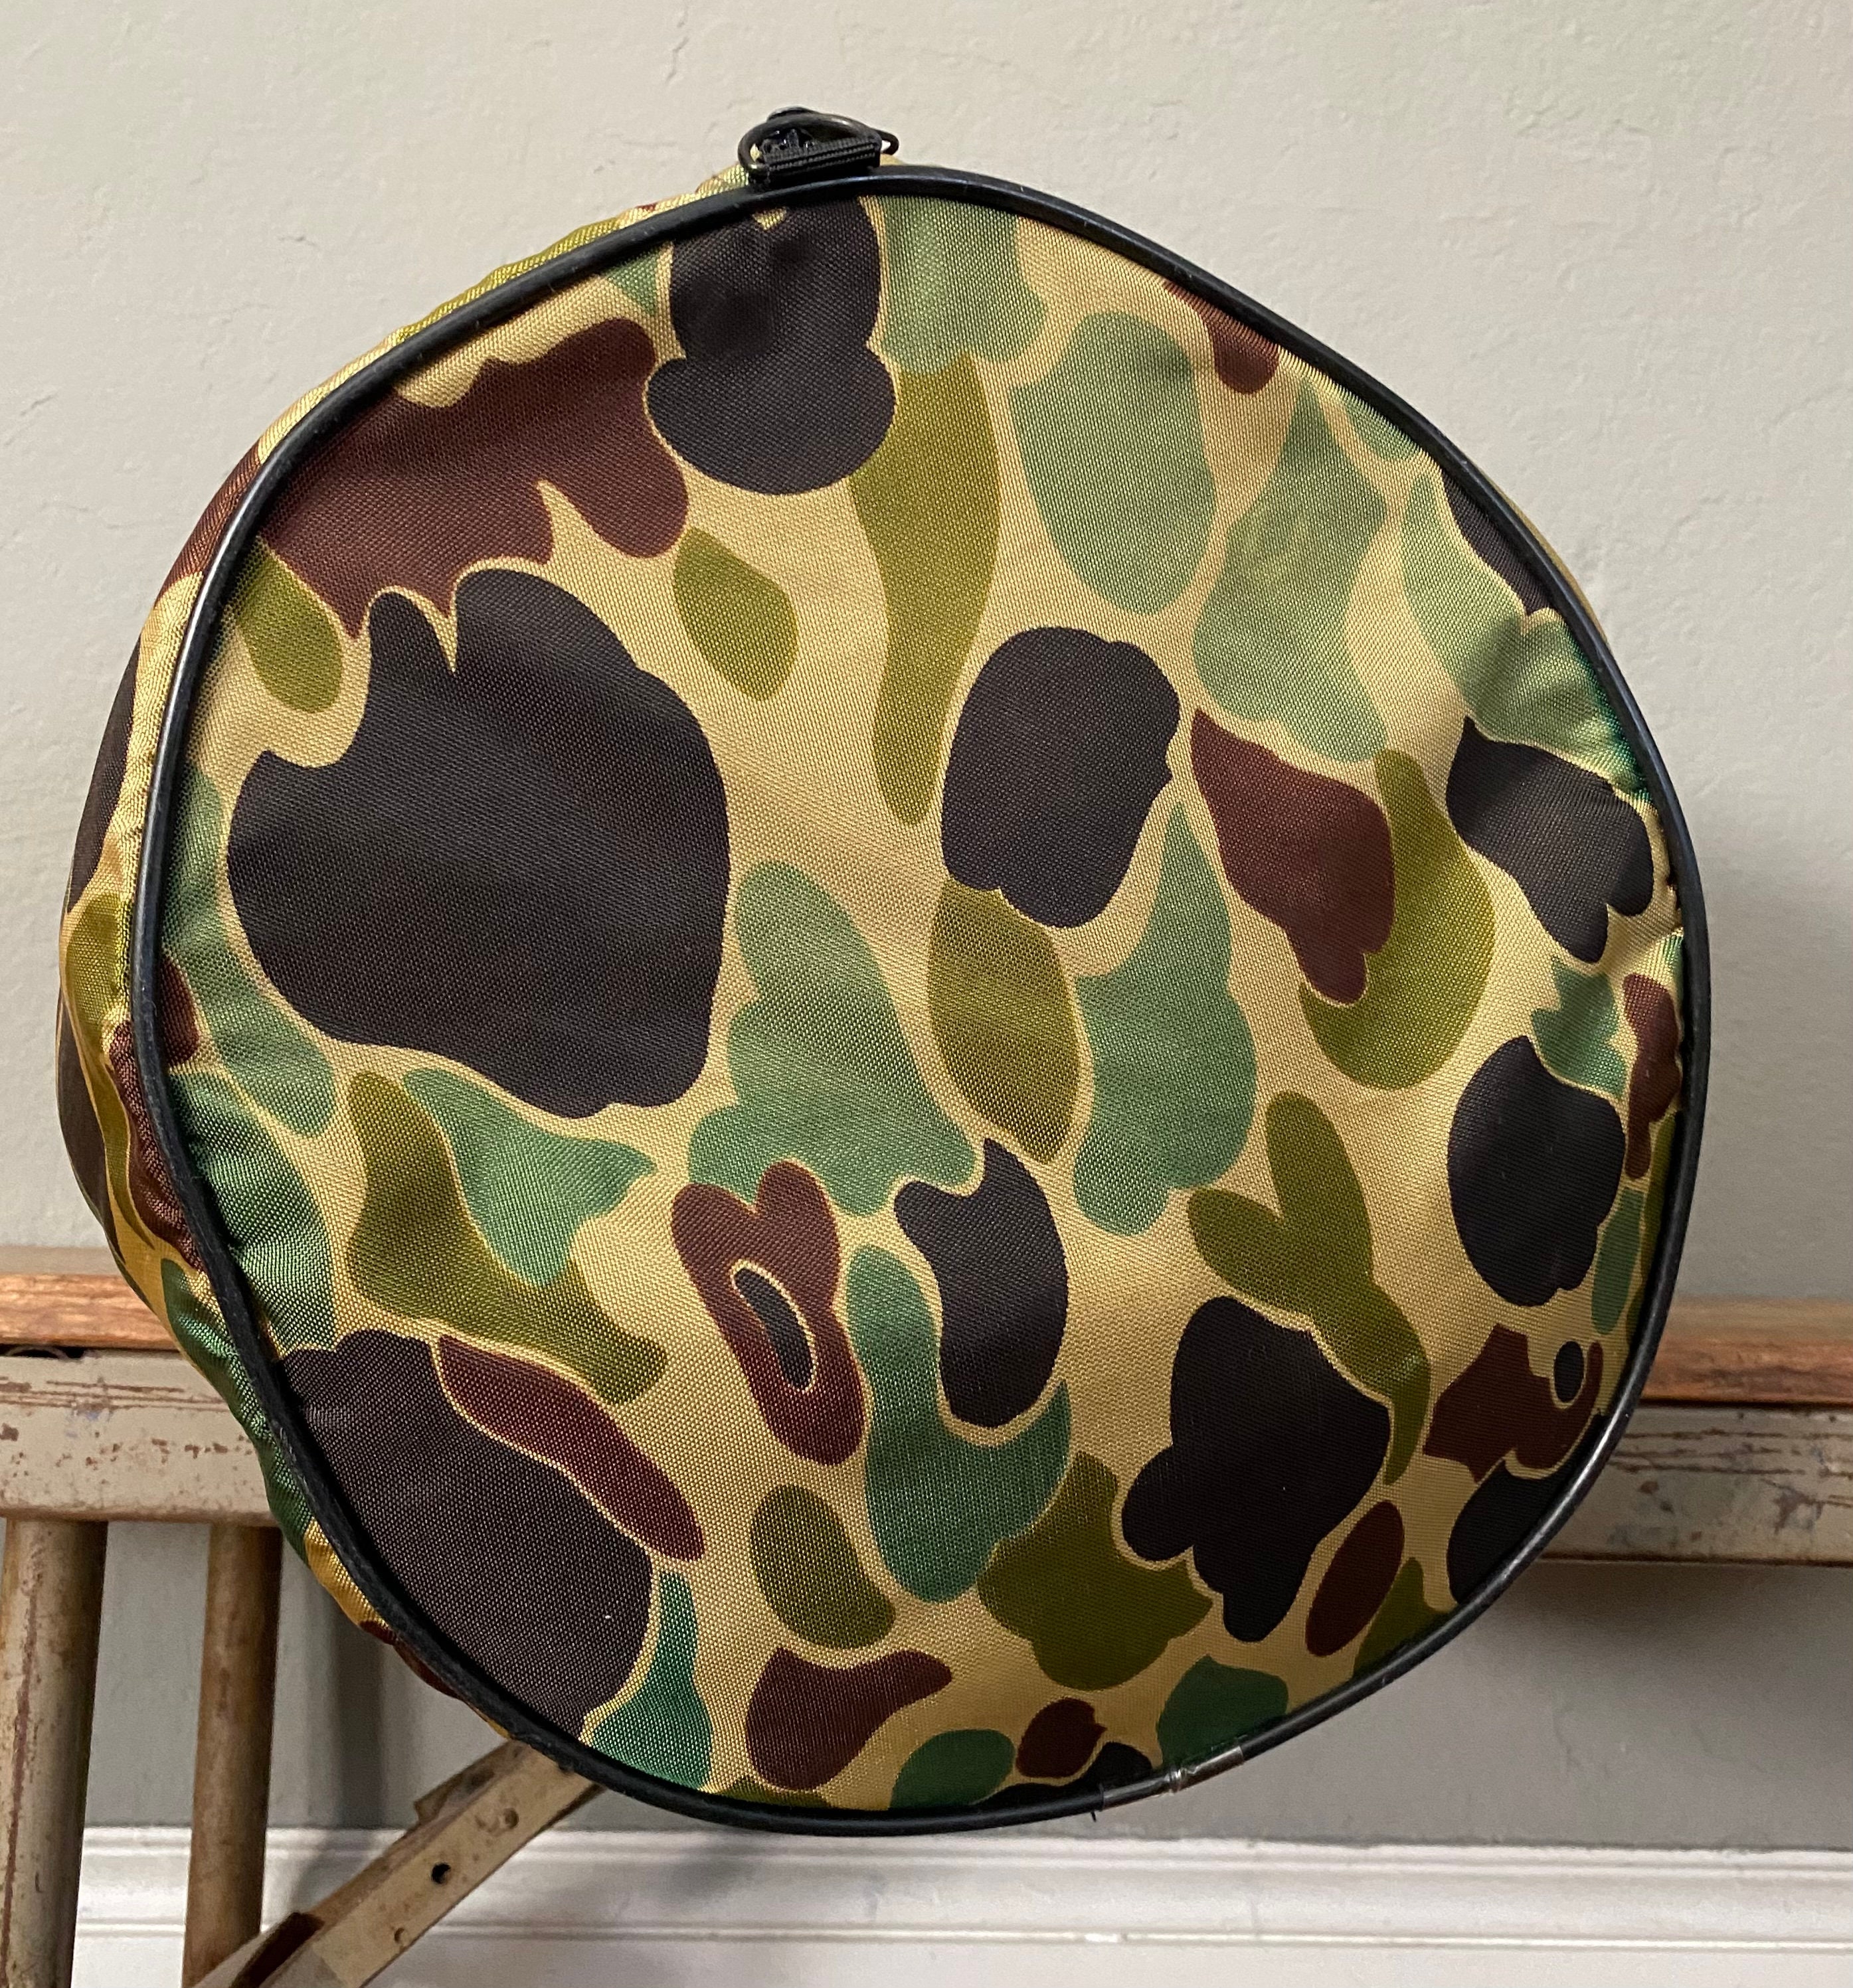 Vintage Camouflage Duffel Bag Tote Camo Hunting Fatigues 